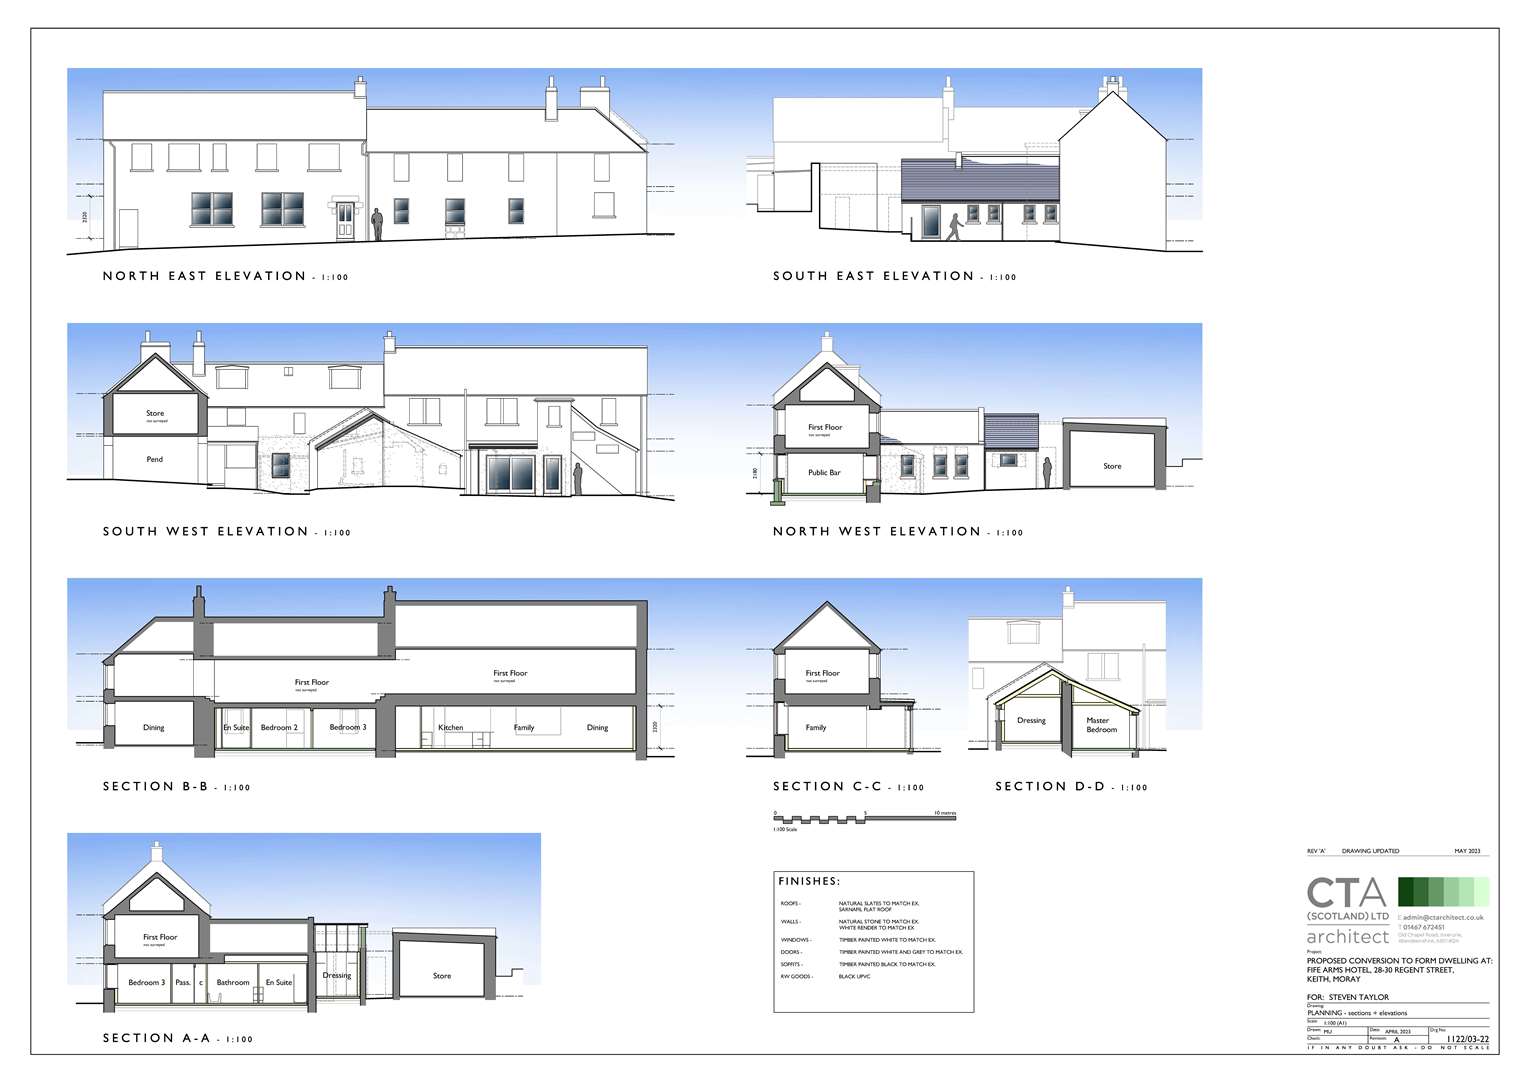 The proposed elevations and sections of the Fife Arms under the plans.